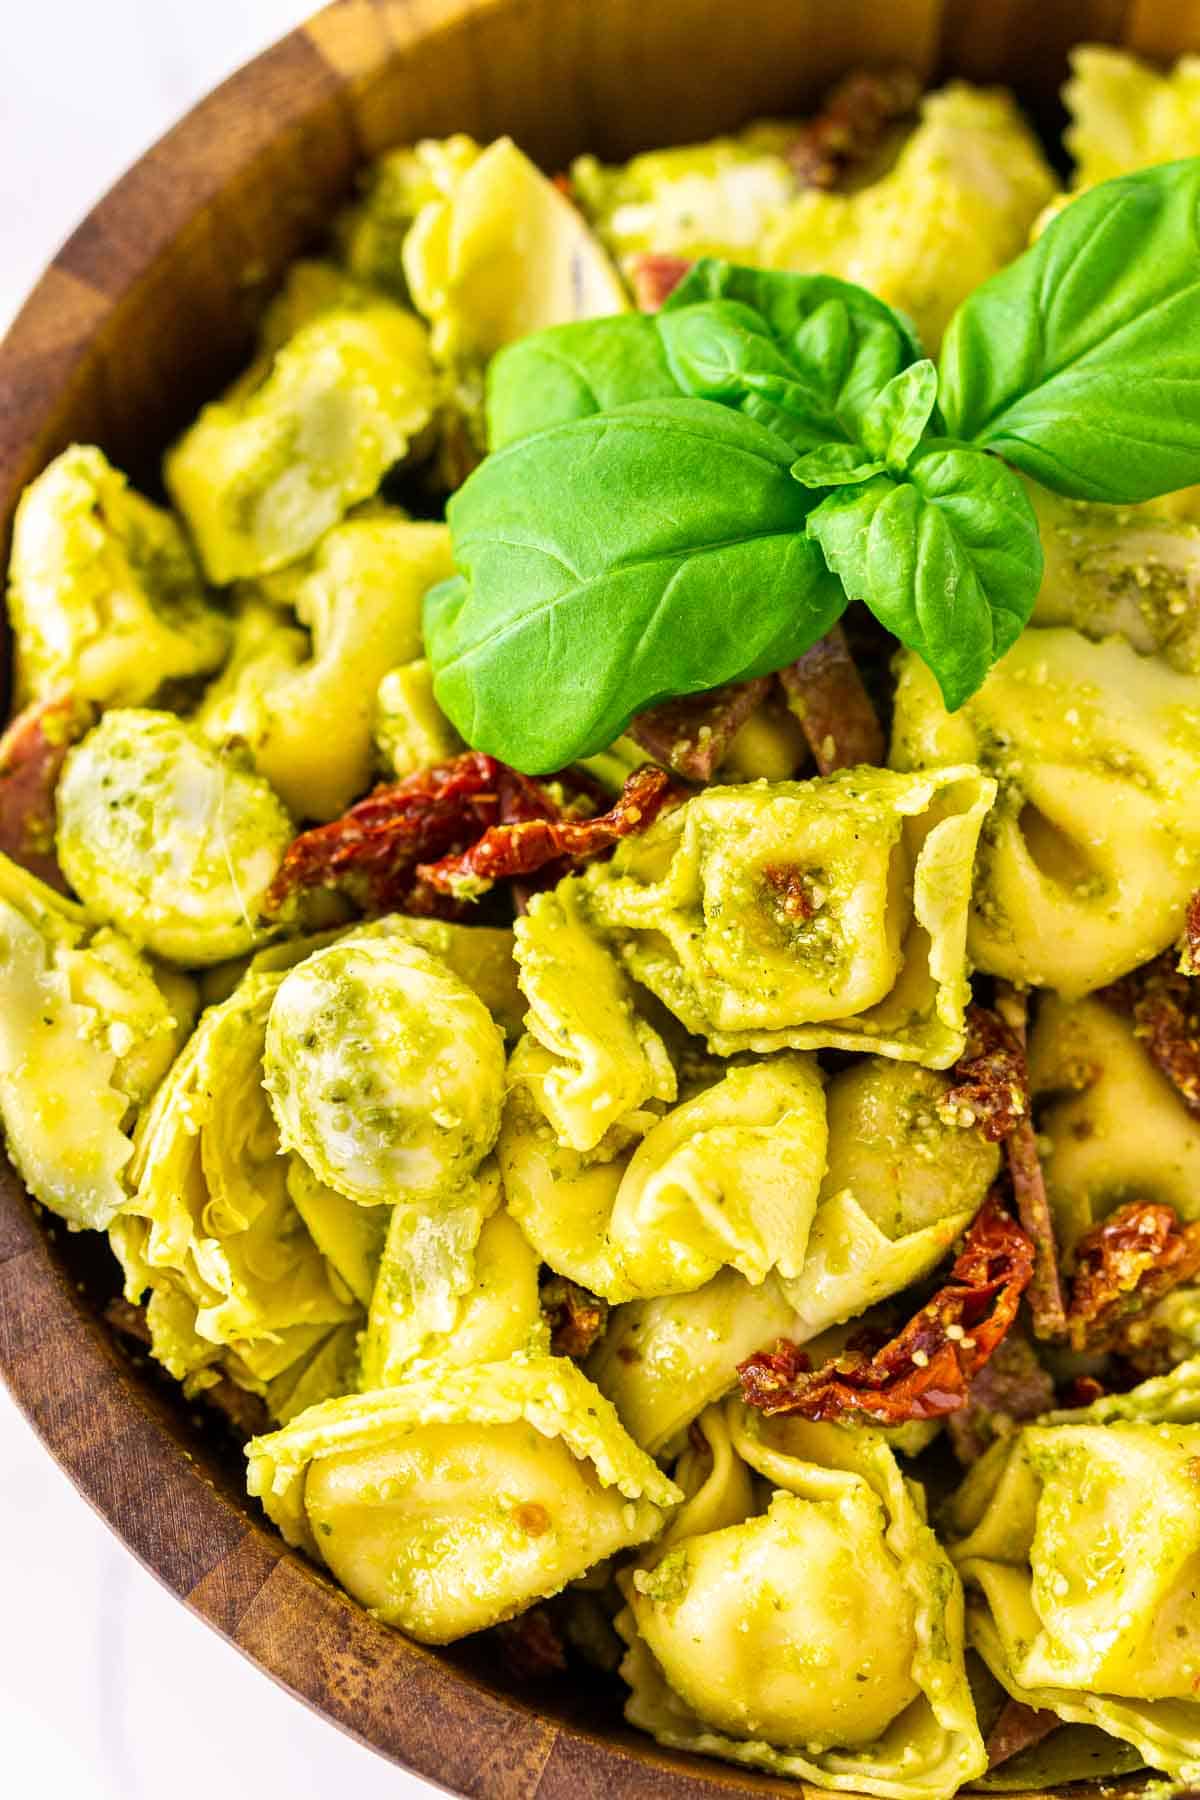 Looking down on a wooden bowl filled with the pesto tortellini salad.